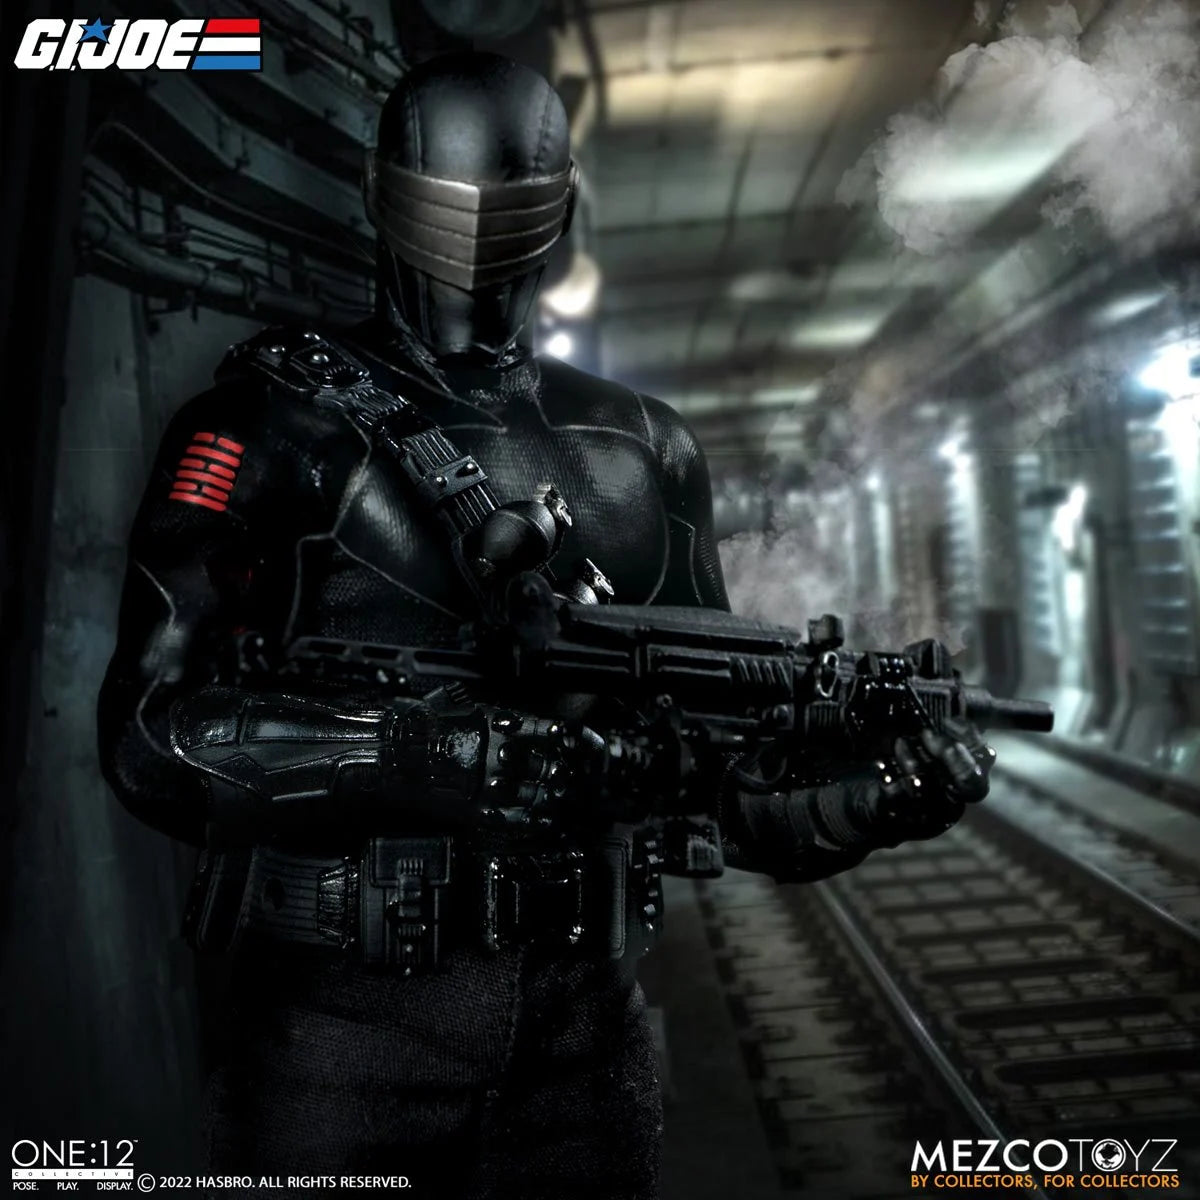 MEZCO - G.I. Joe: Snake Eyes Deluxe Edition One:12 Collective Action Figure